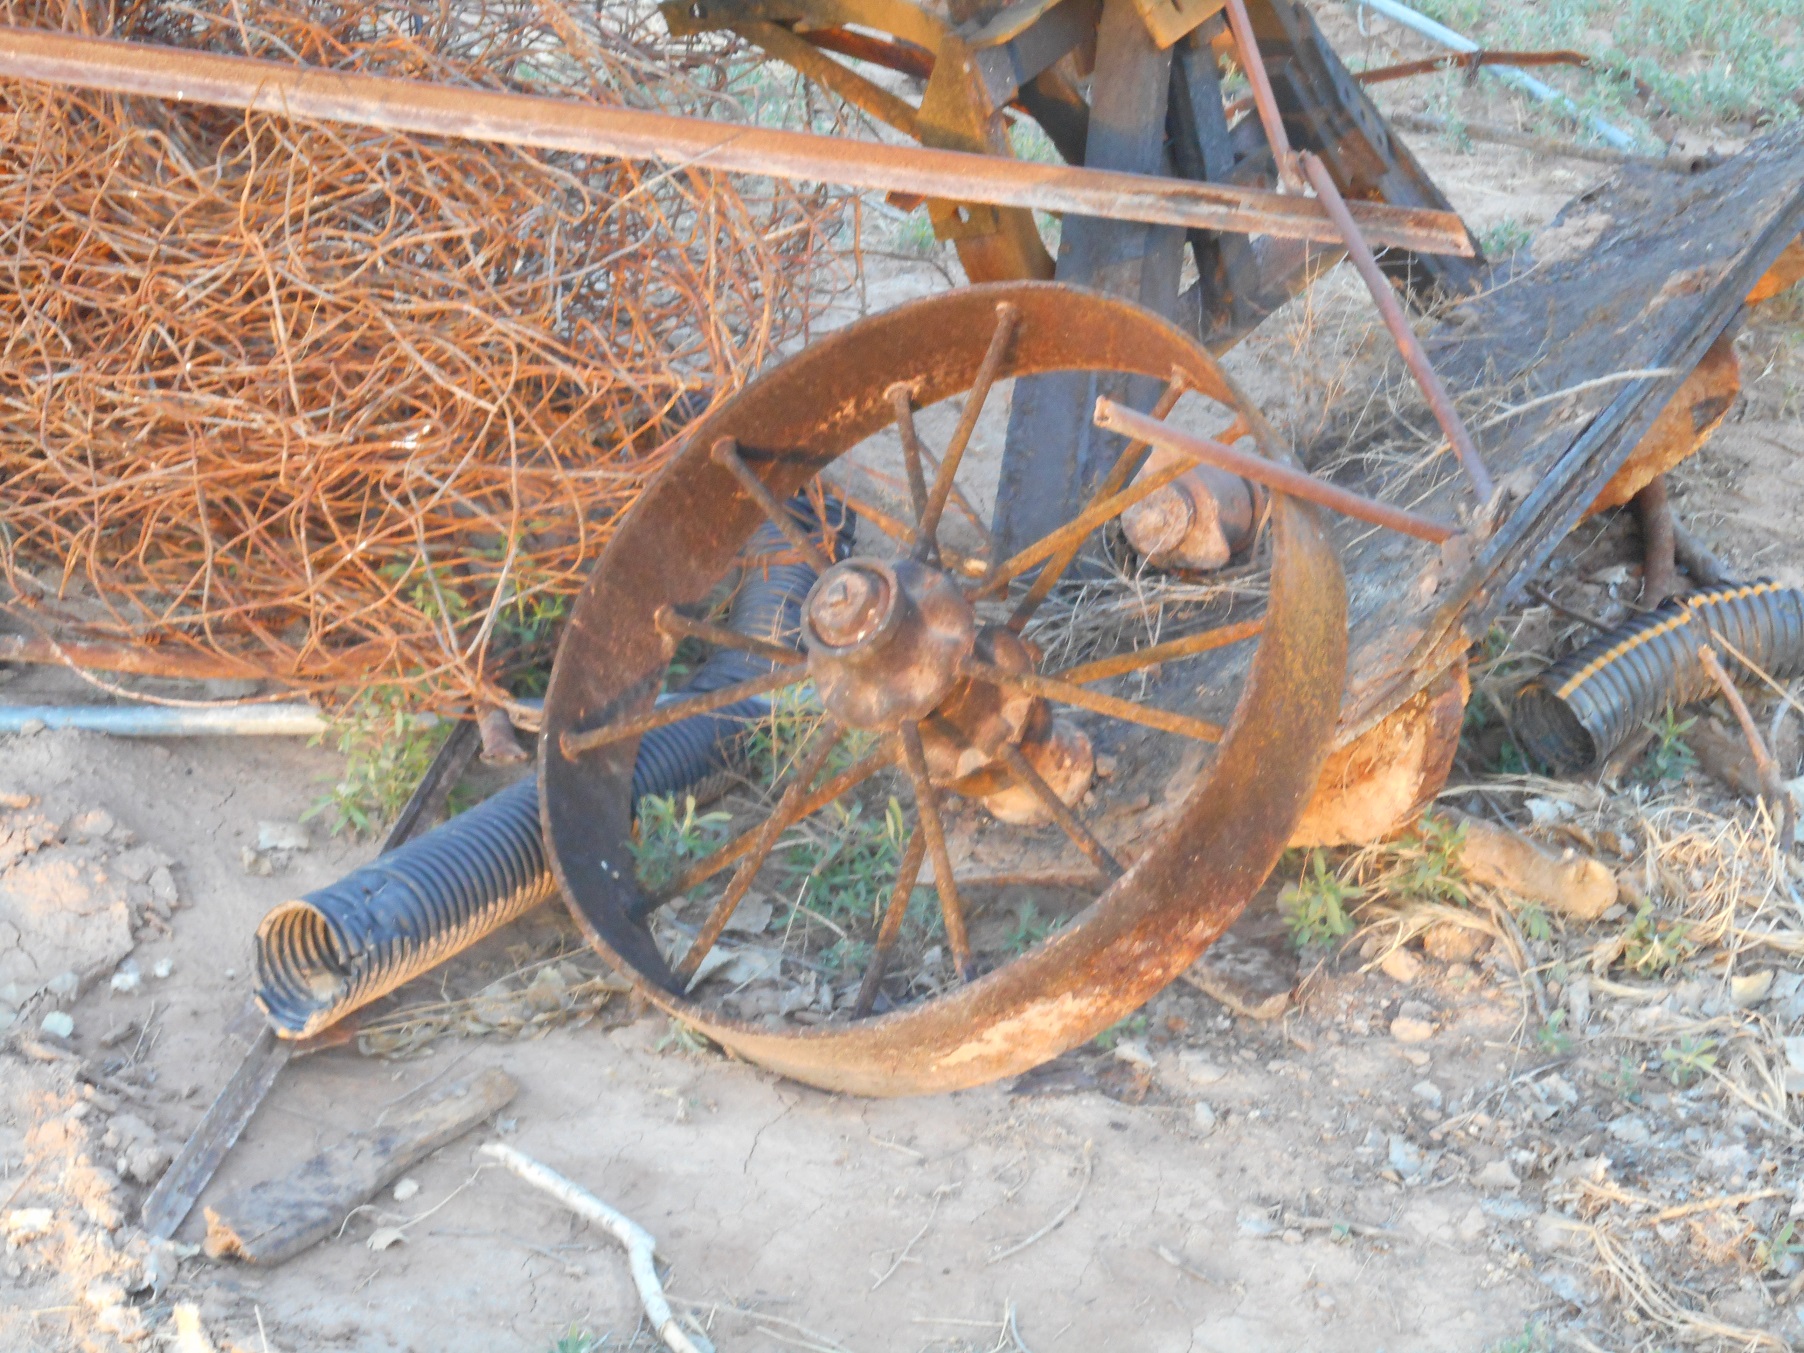 Old metal wheel and other junk on the Foster Farm